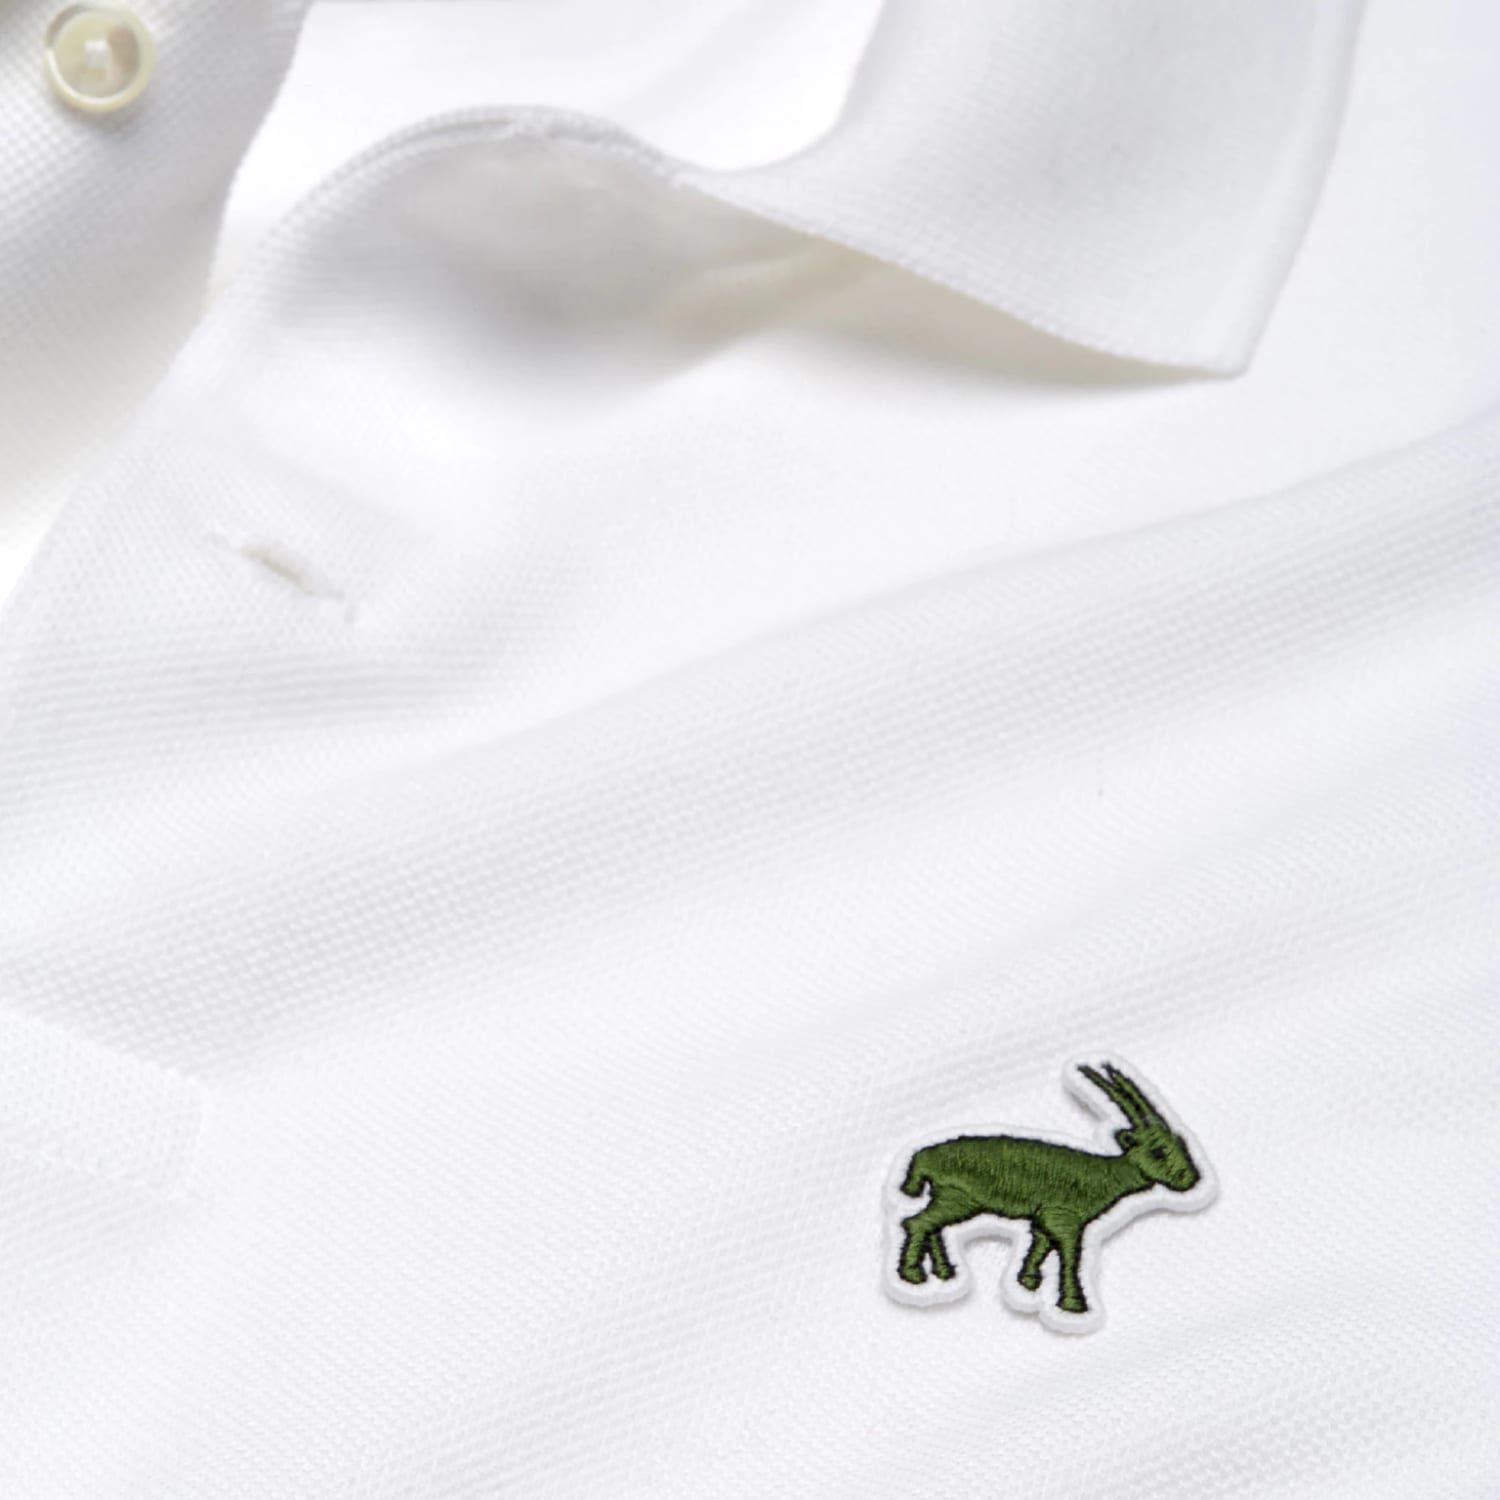 Lacoste replaces with endangered species